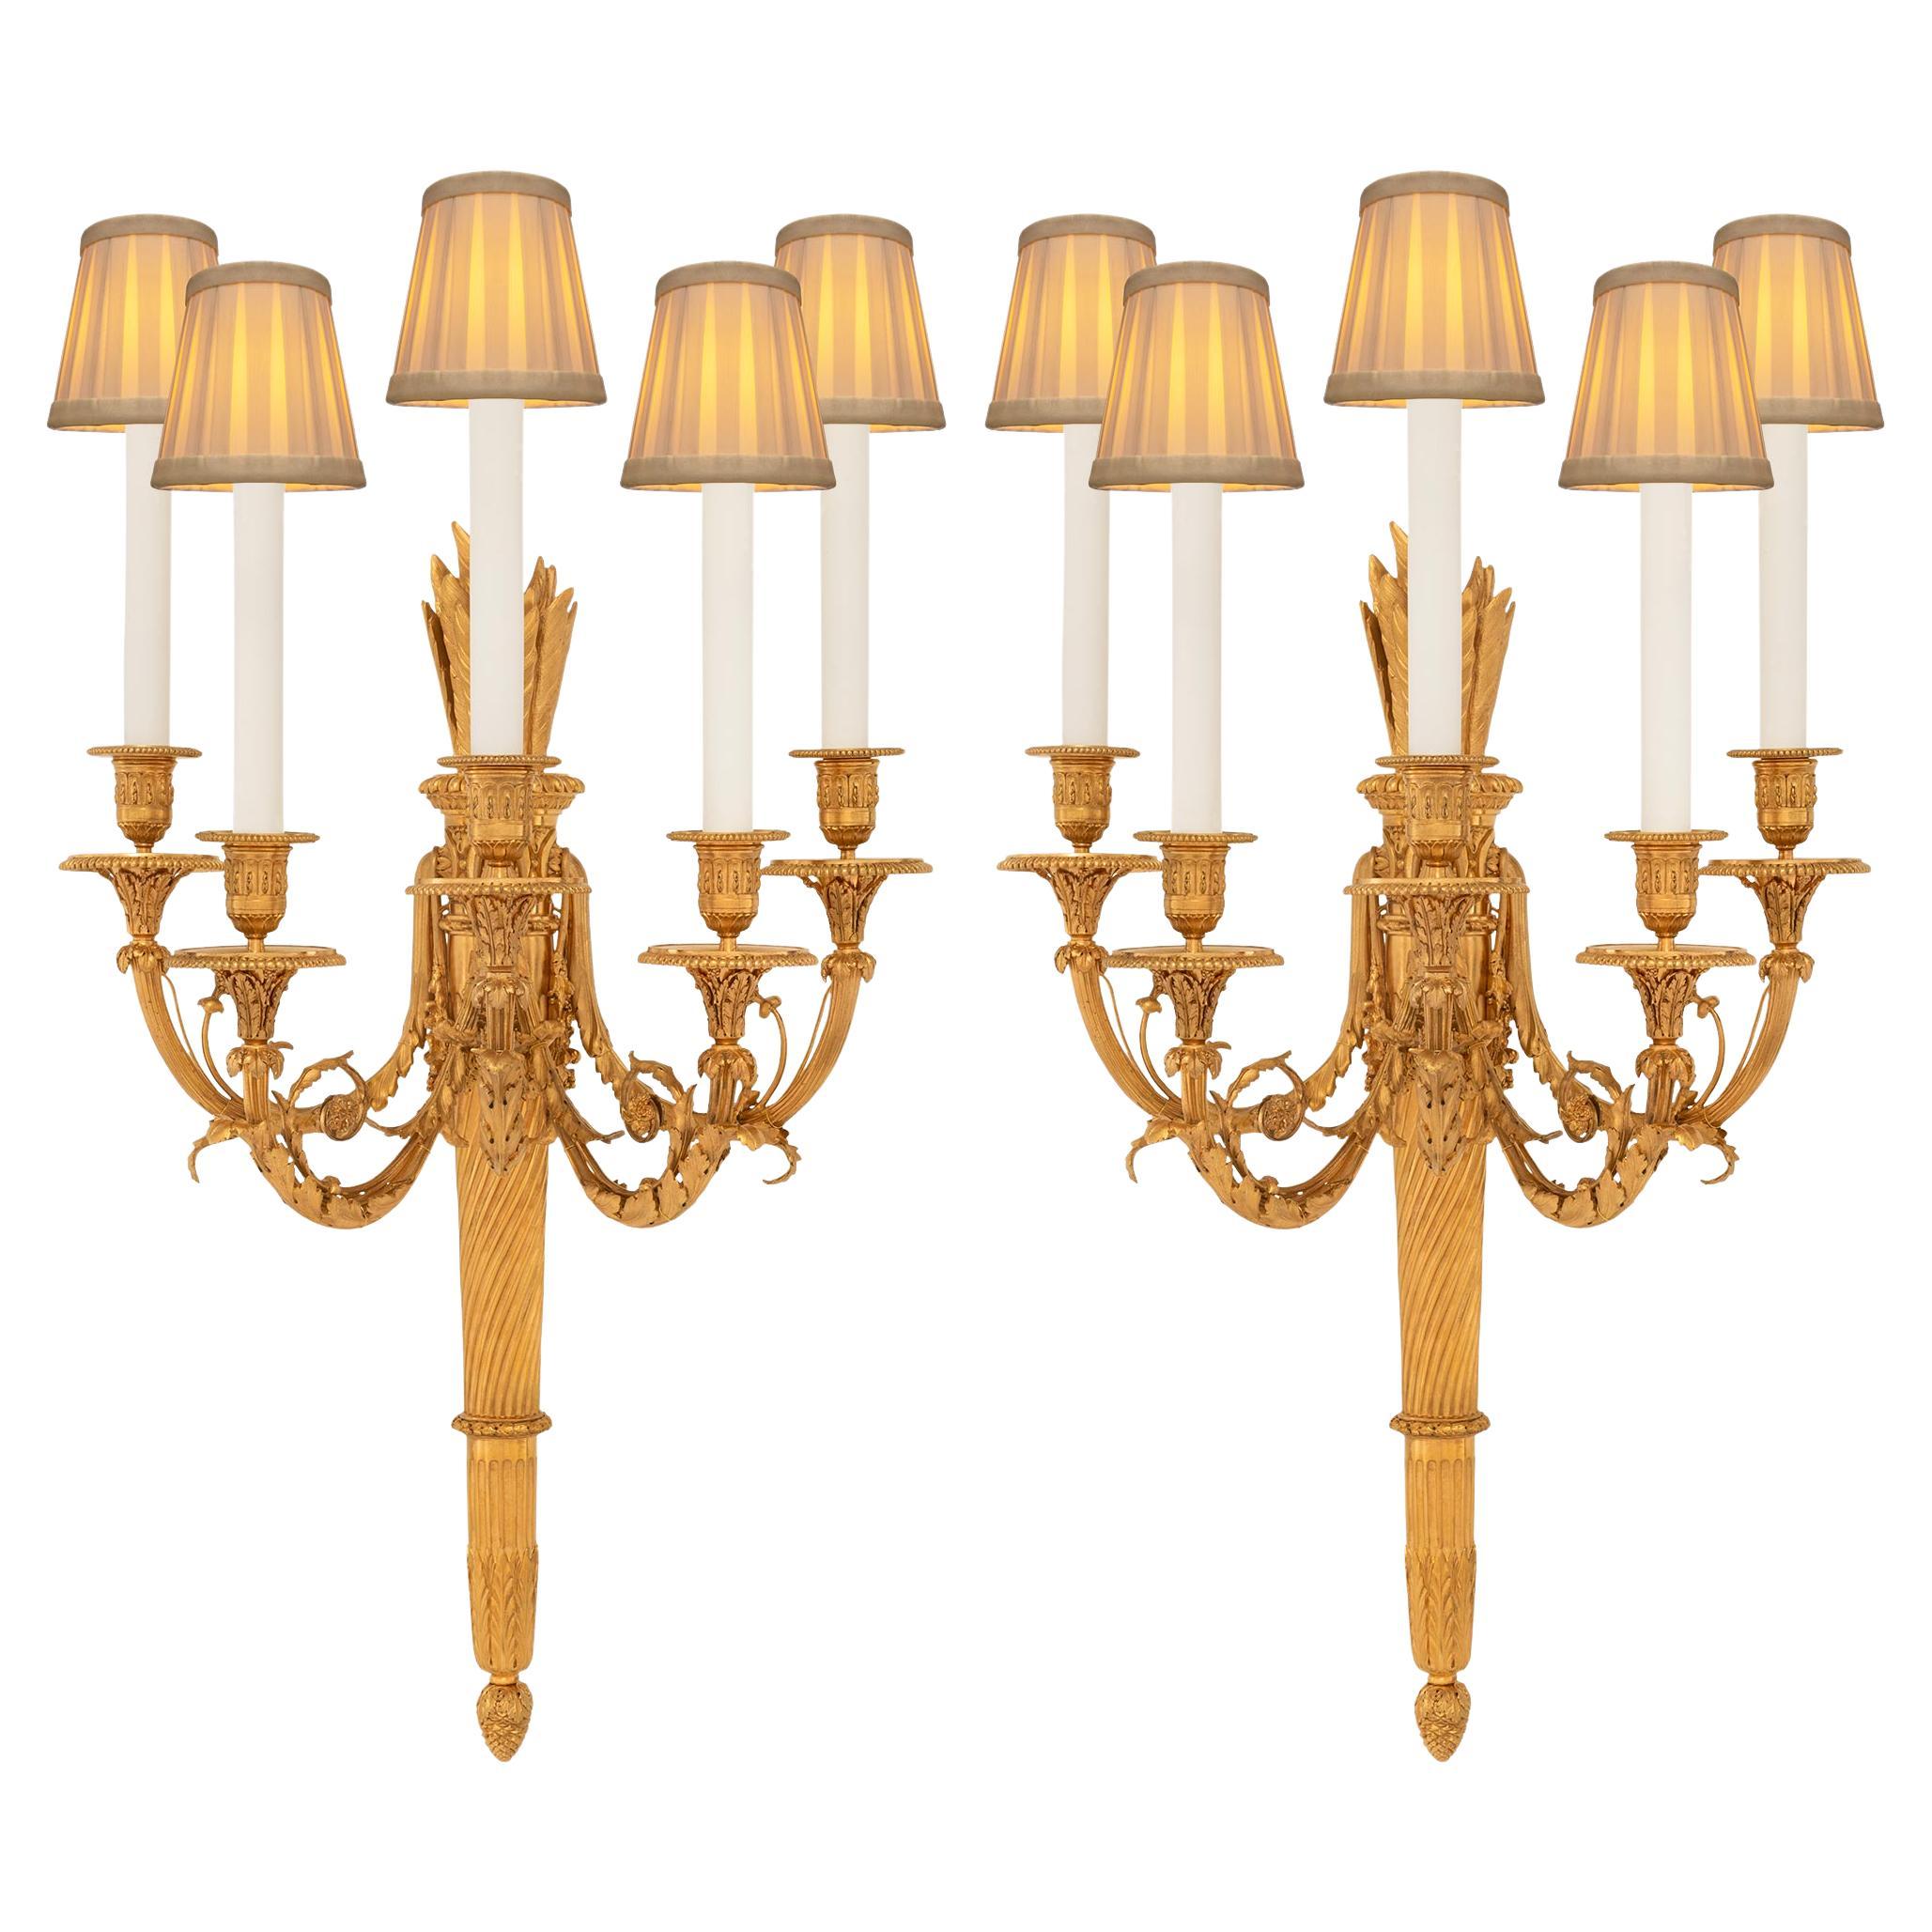 A large scaled pair of French 19th century Louis XVI st. Ormolu sconces